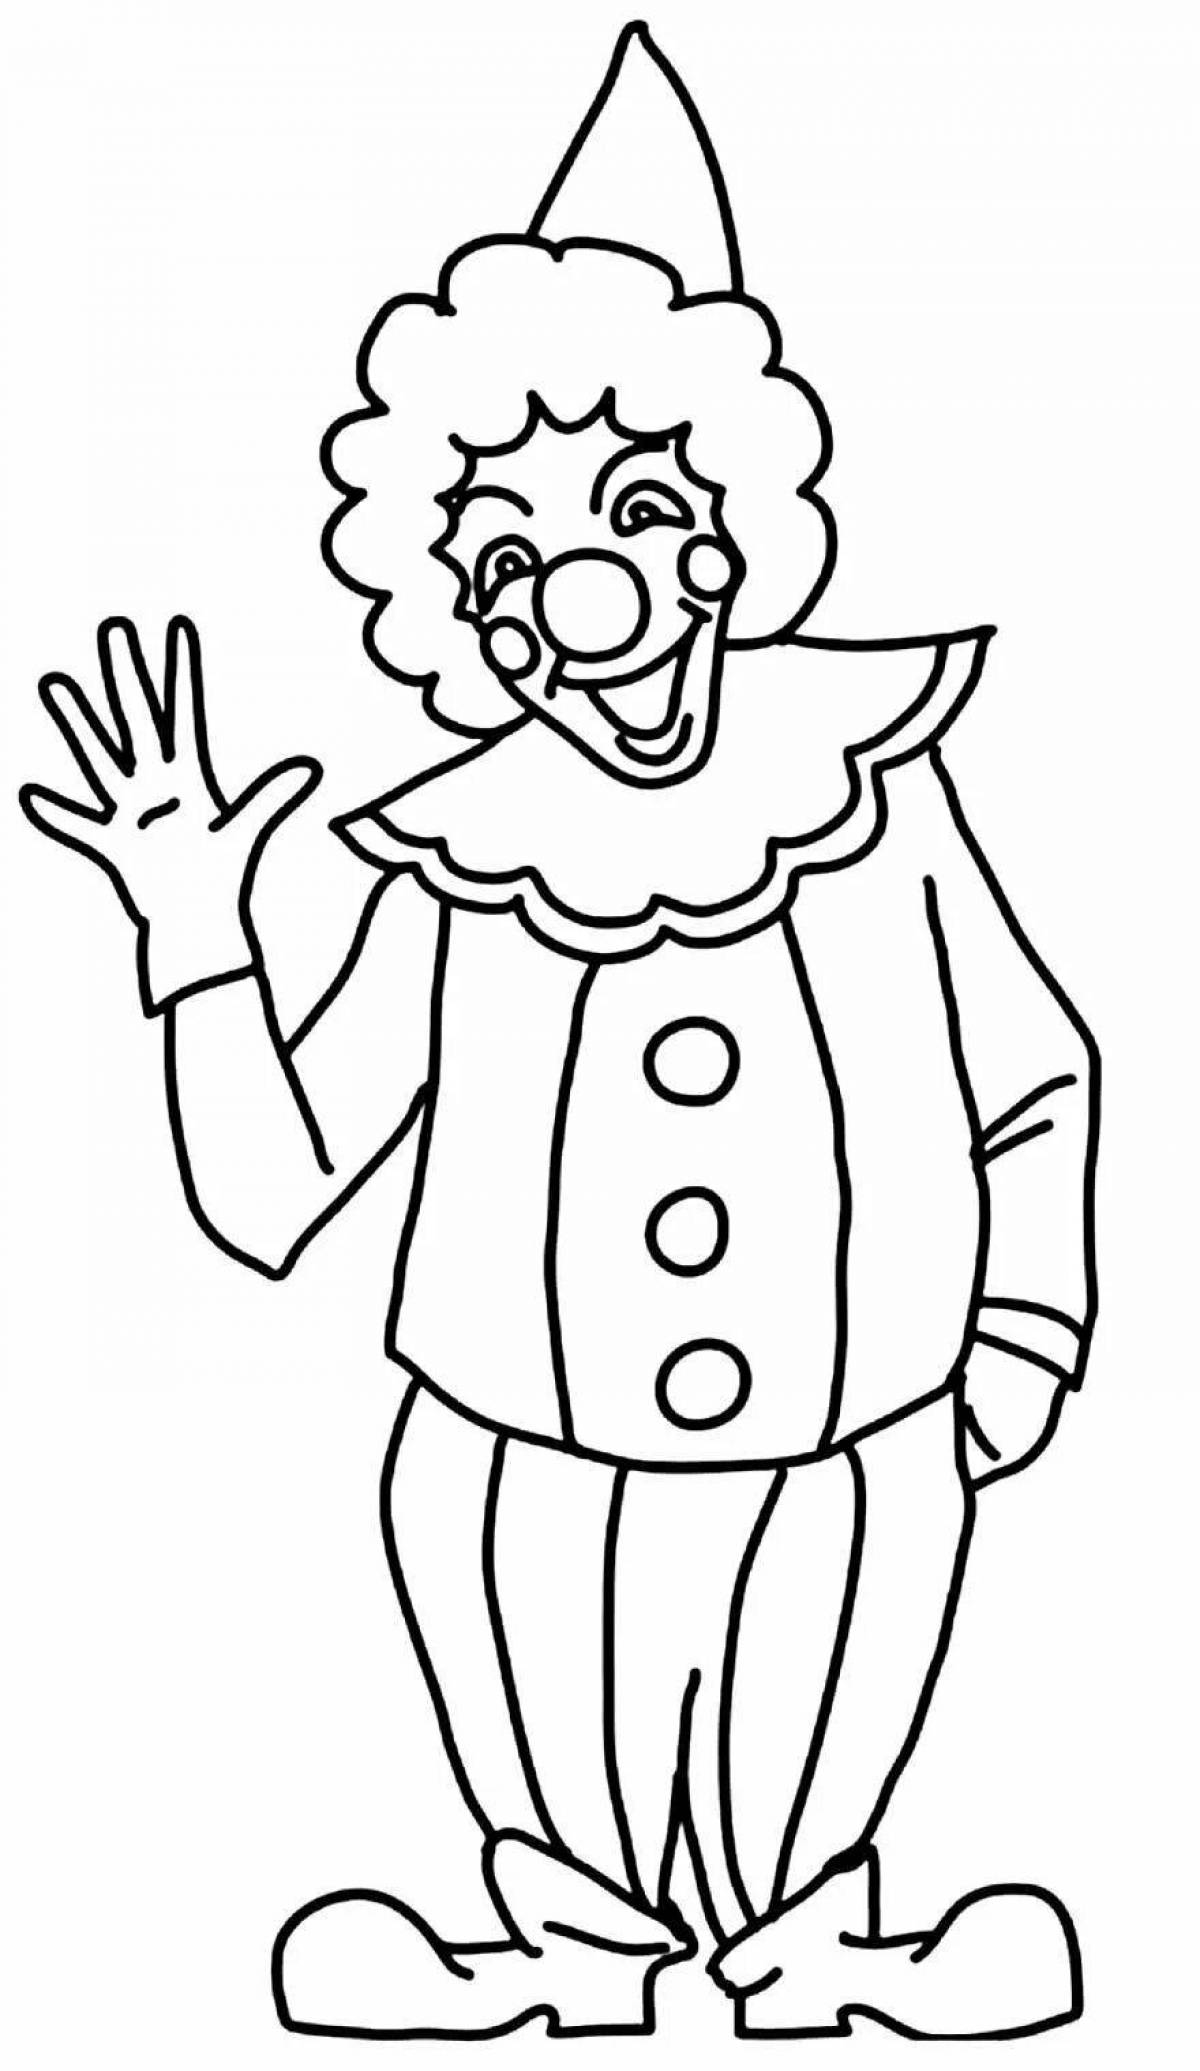 Coloring page bright theatrical costume